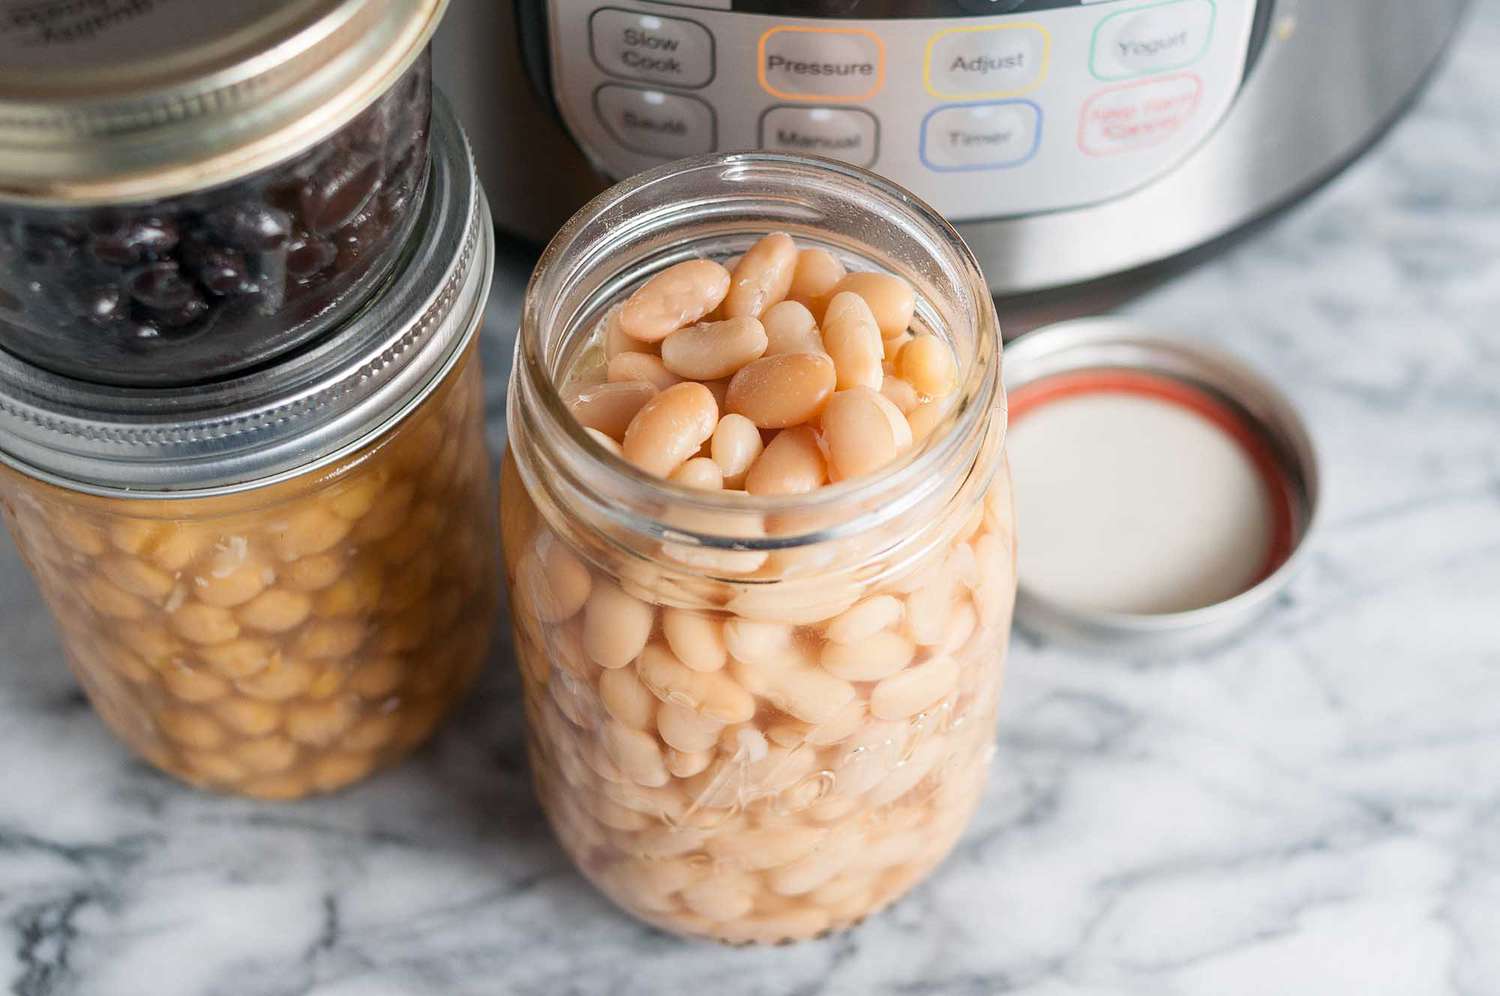 How To Make Ham And Beans In An Electric Pressure Cooker